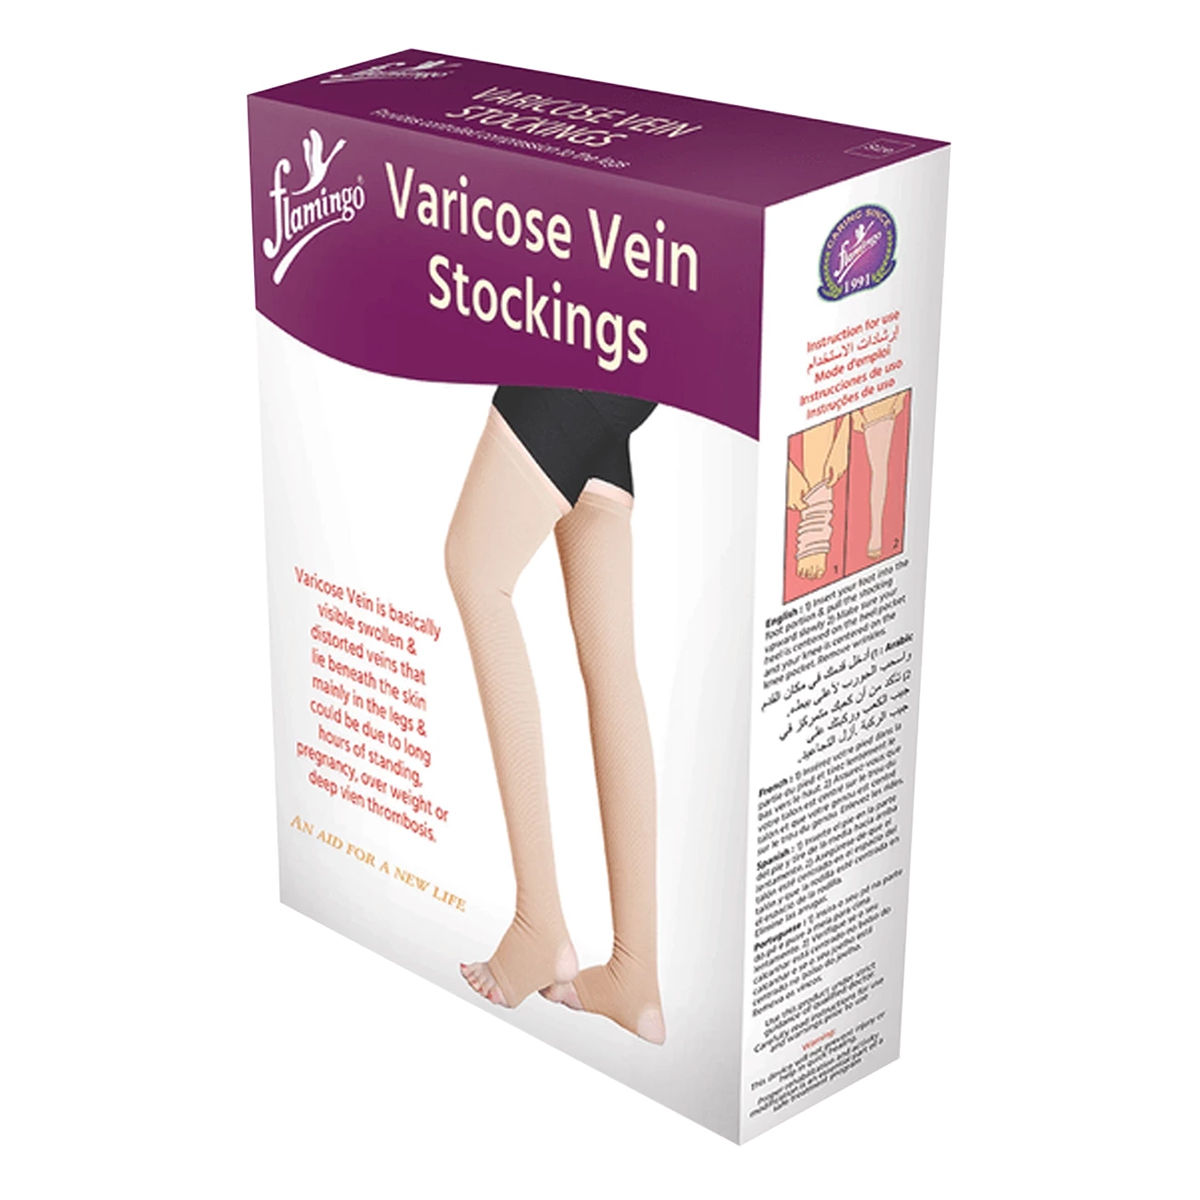 MYLO Care Open Toe Compression Stockings for Varicose Veins Men, Women  Compression Price in India - Buy MYLO Care Open Toe Compression Stockings  for Varicose Veins Men, Women Compression online at